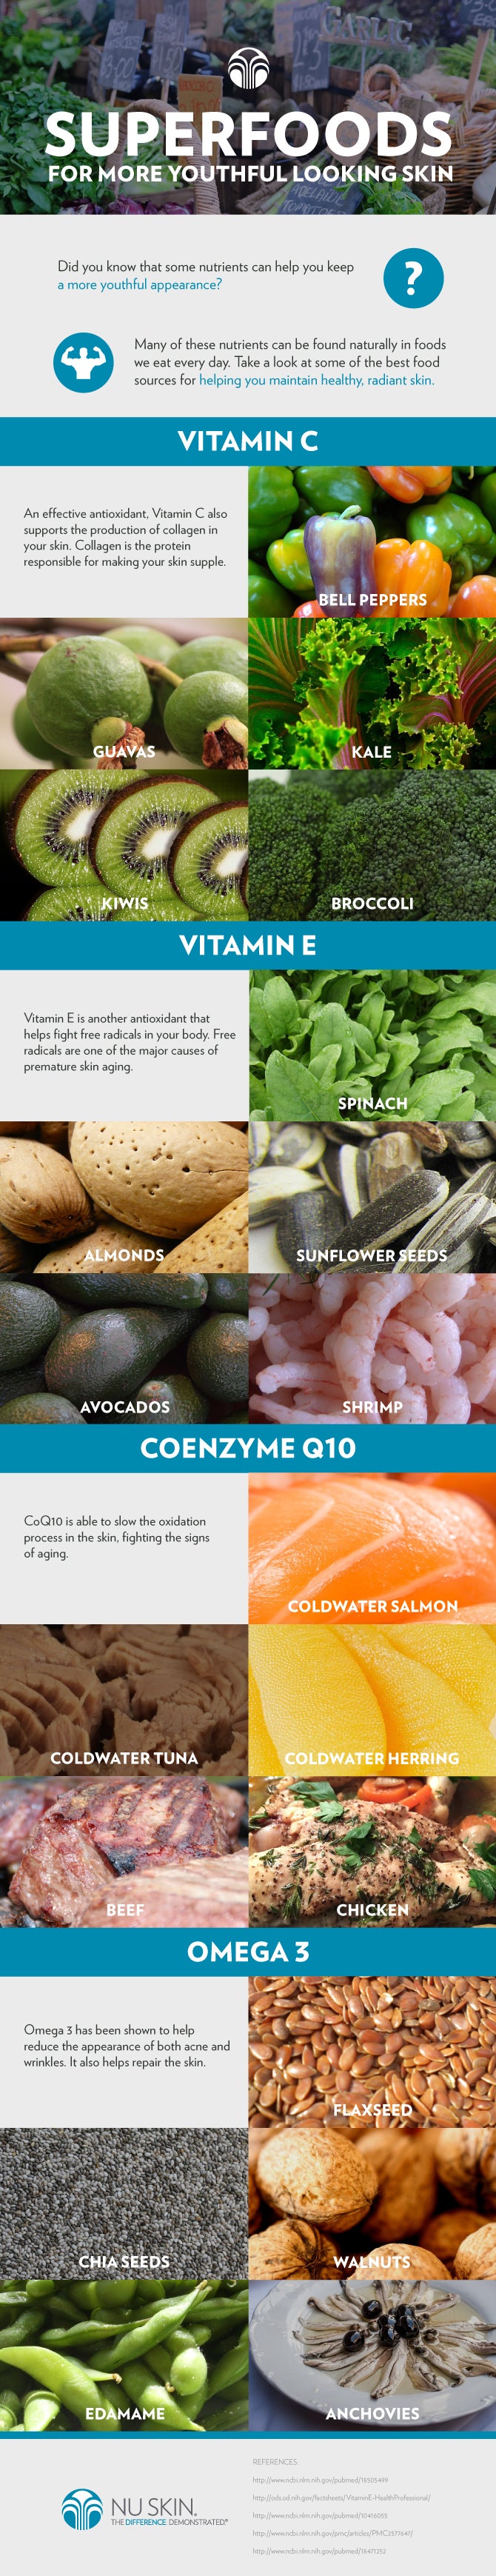 5 Superfoods for Healthier, More Youthful Skin Infographic vitamin c, vitamin e, coenzyme Q10, Omega 3